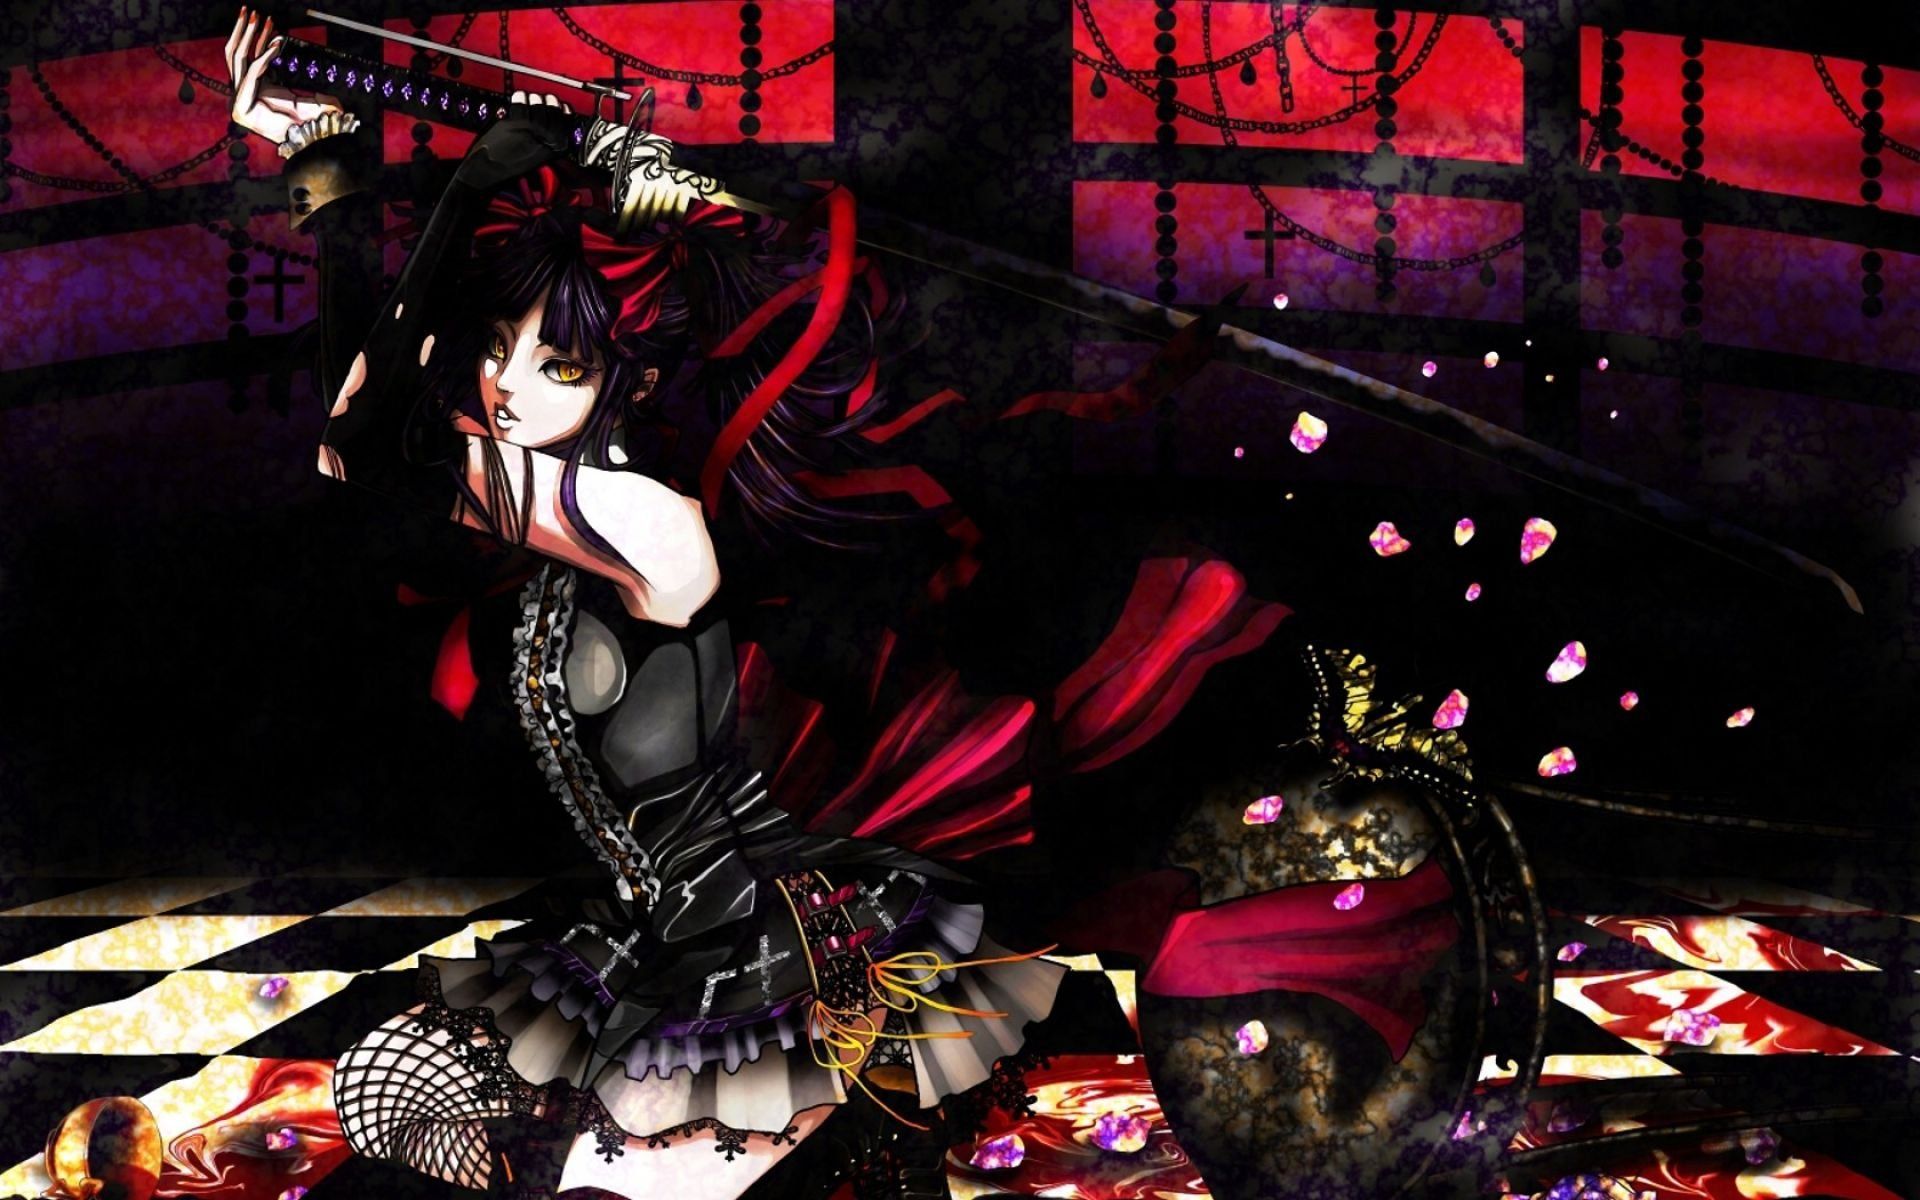 Beautiful Goth Anime Wgothic Anime Wallpaper Hdllpapers HD. Anime